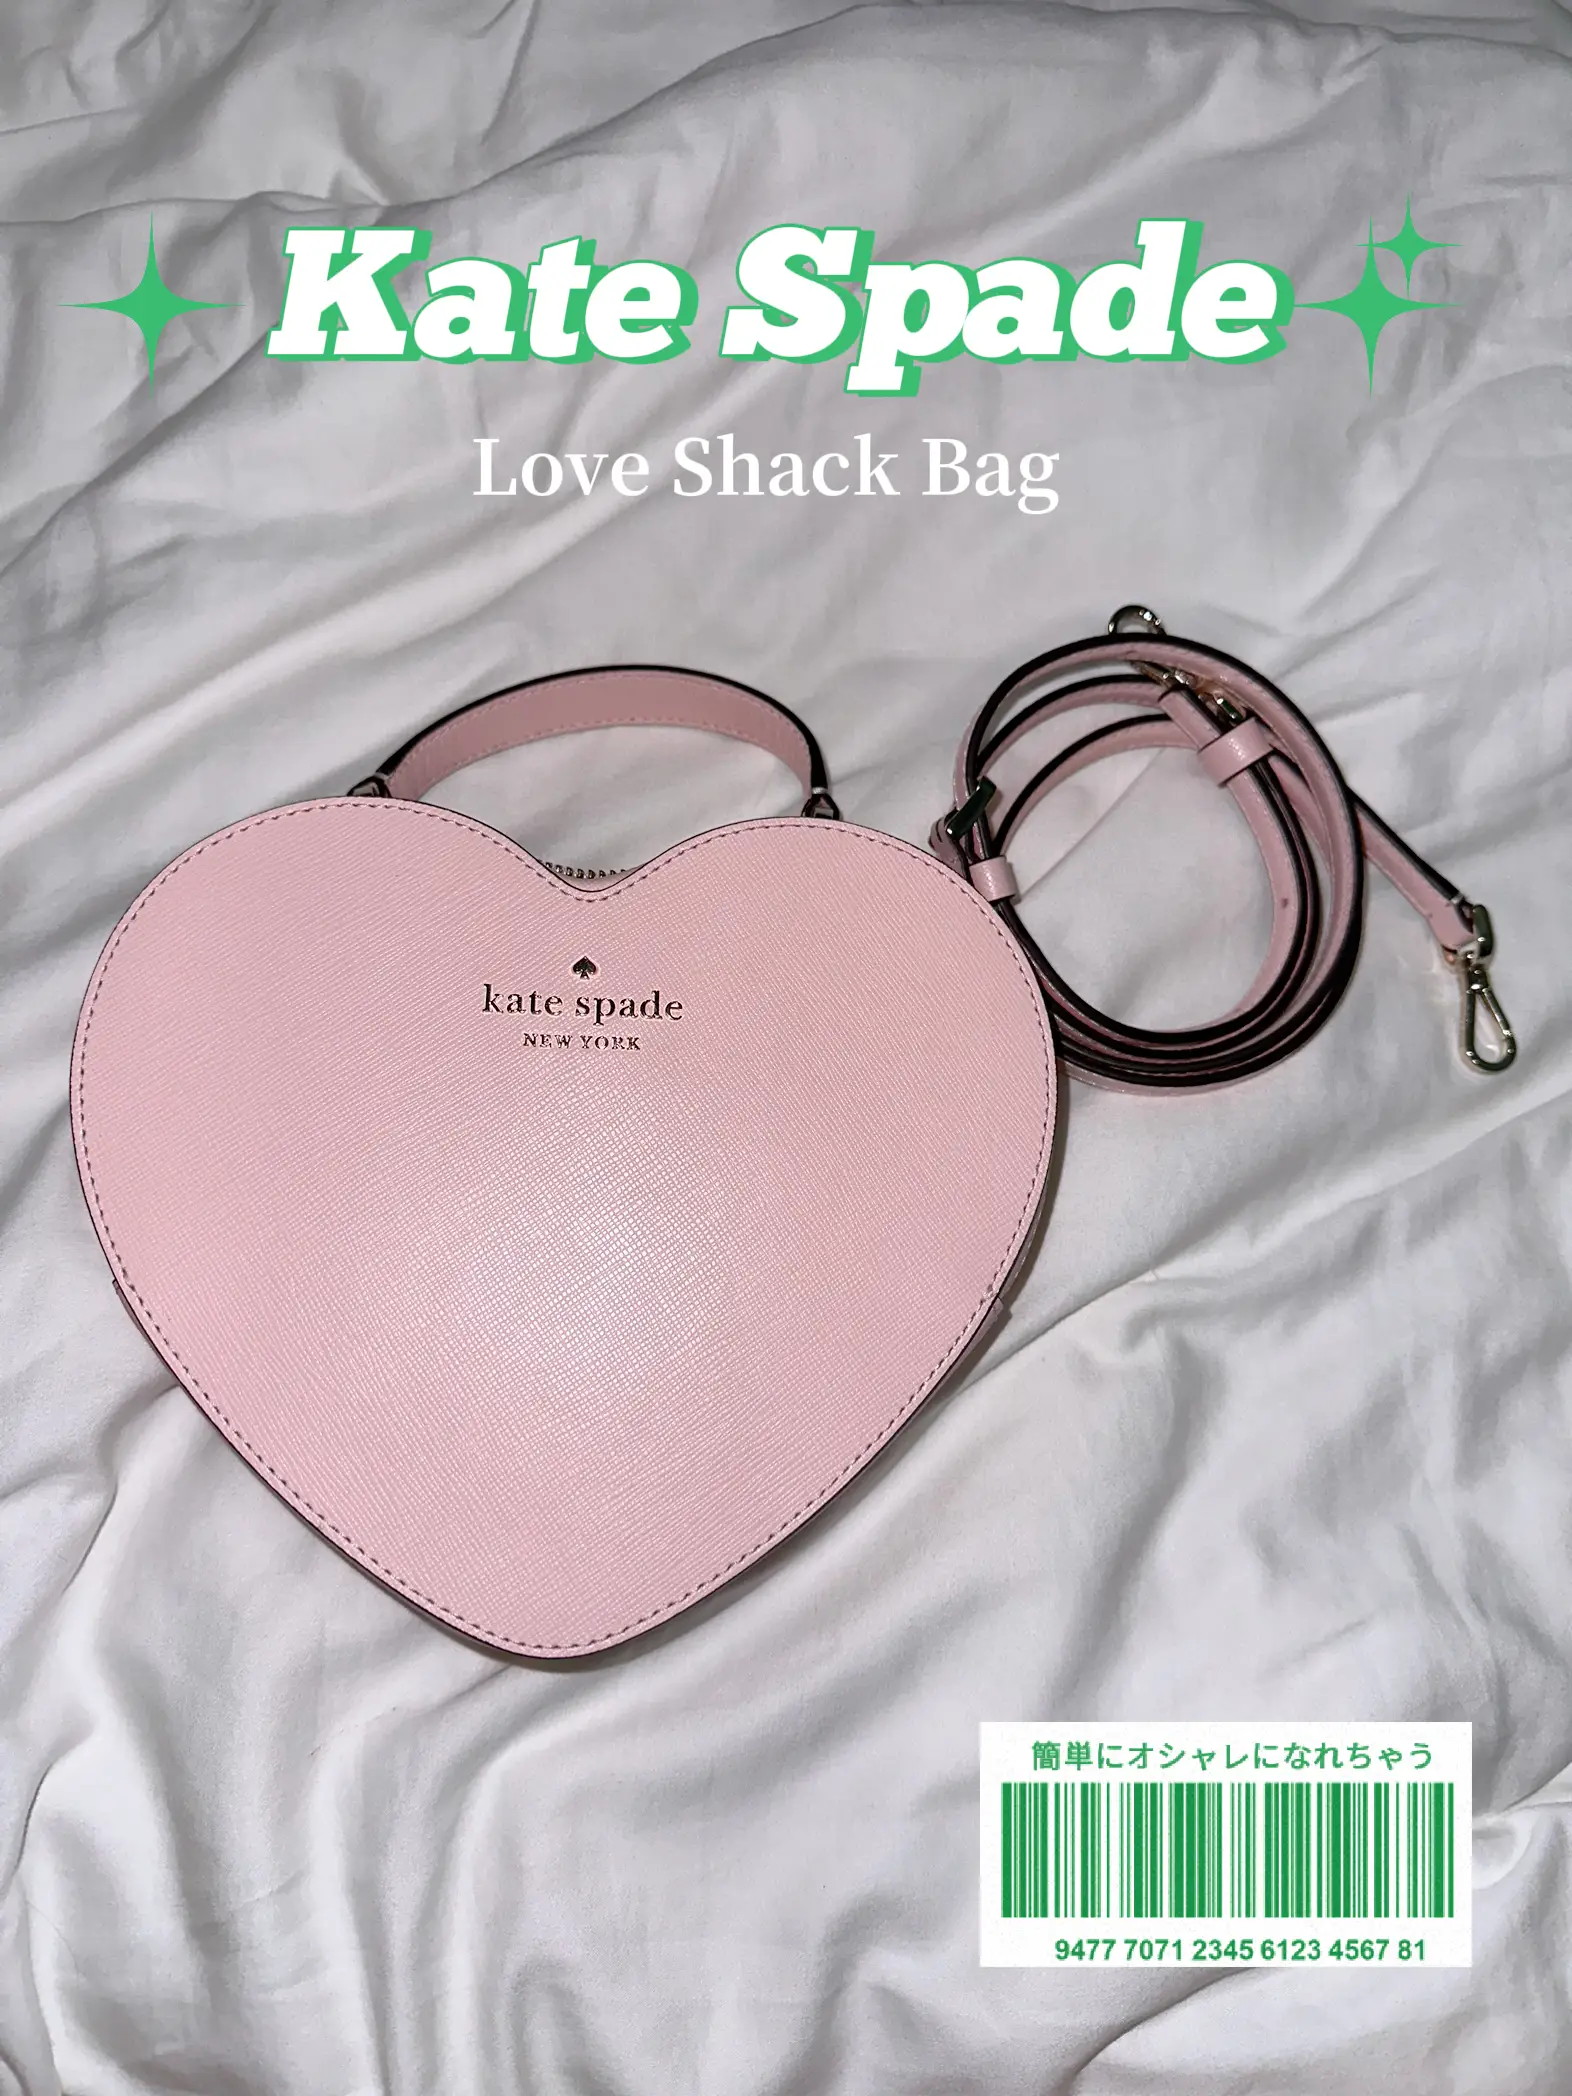 28 Apr-3 May 2023: Kate Spade New York Special Sale at Genting